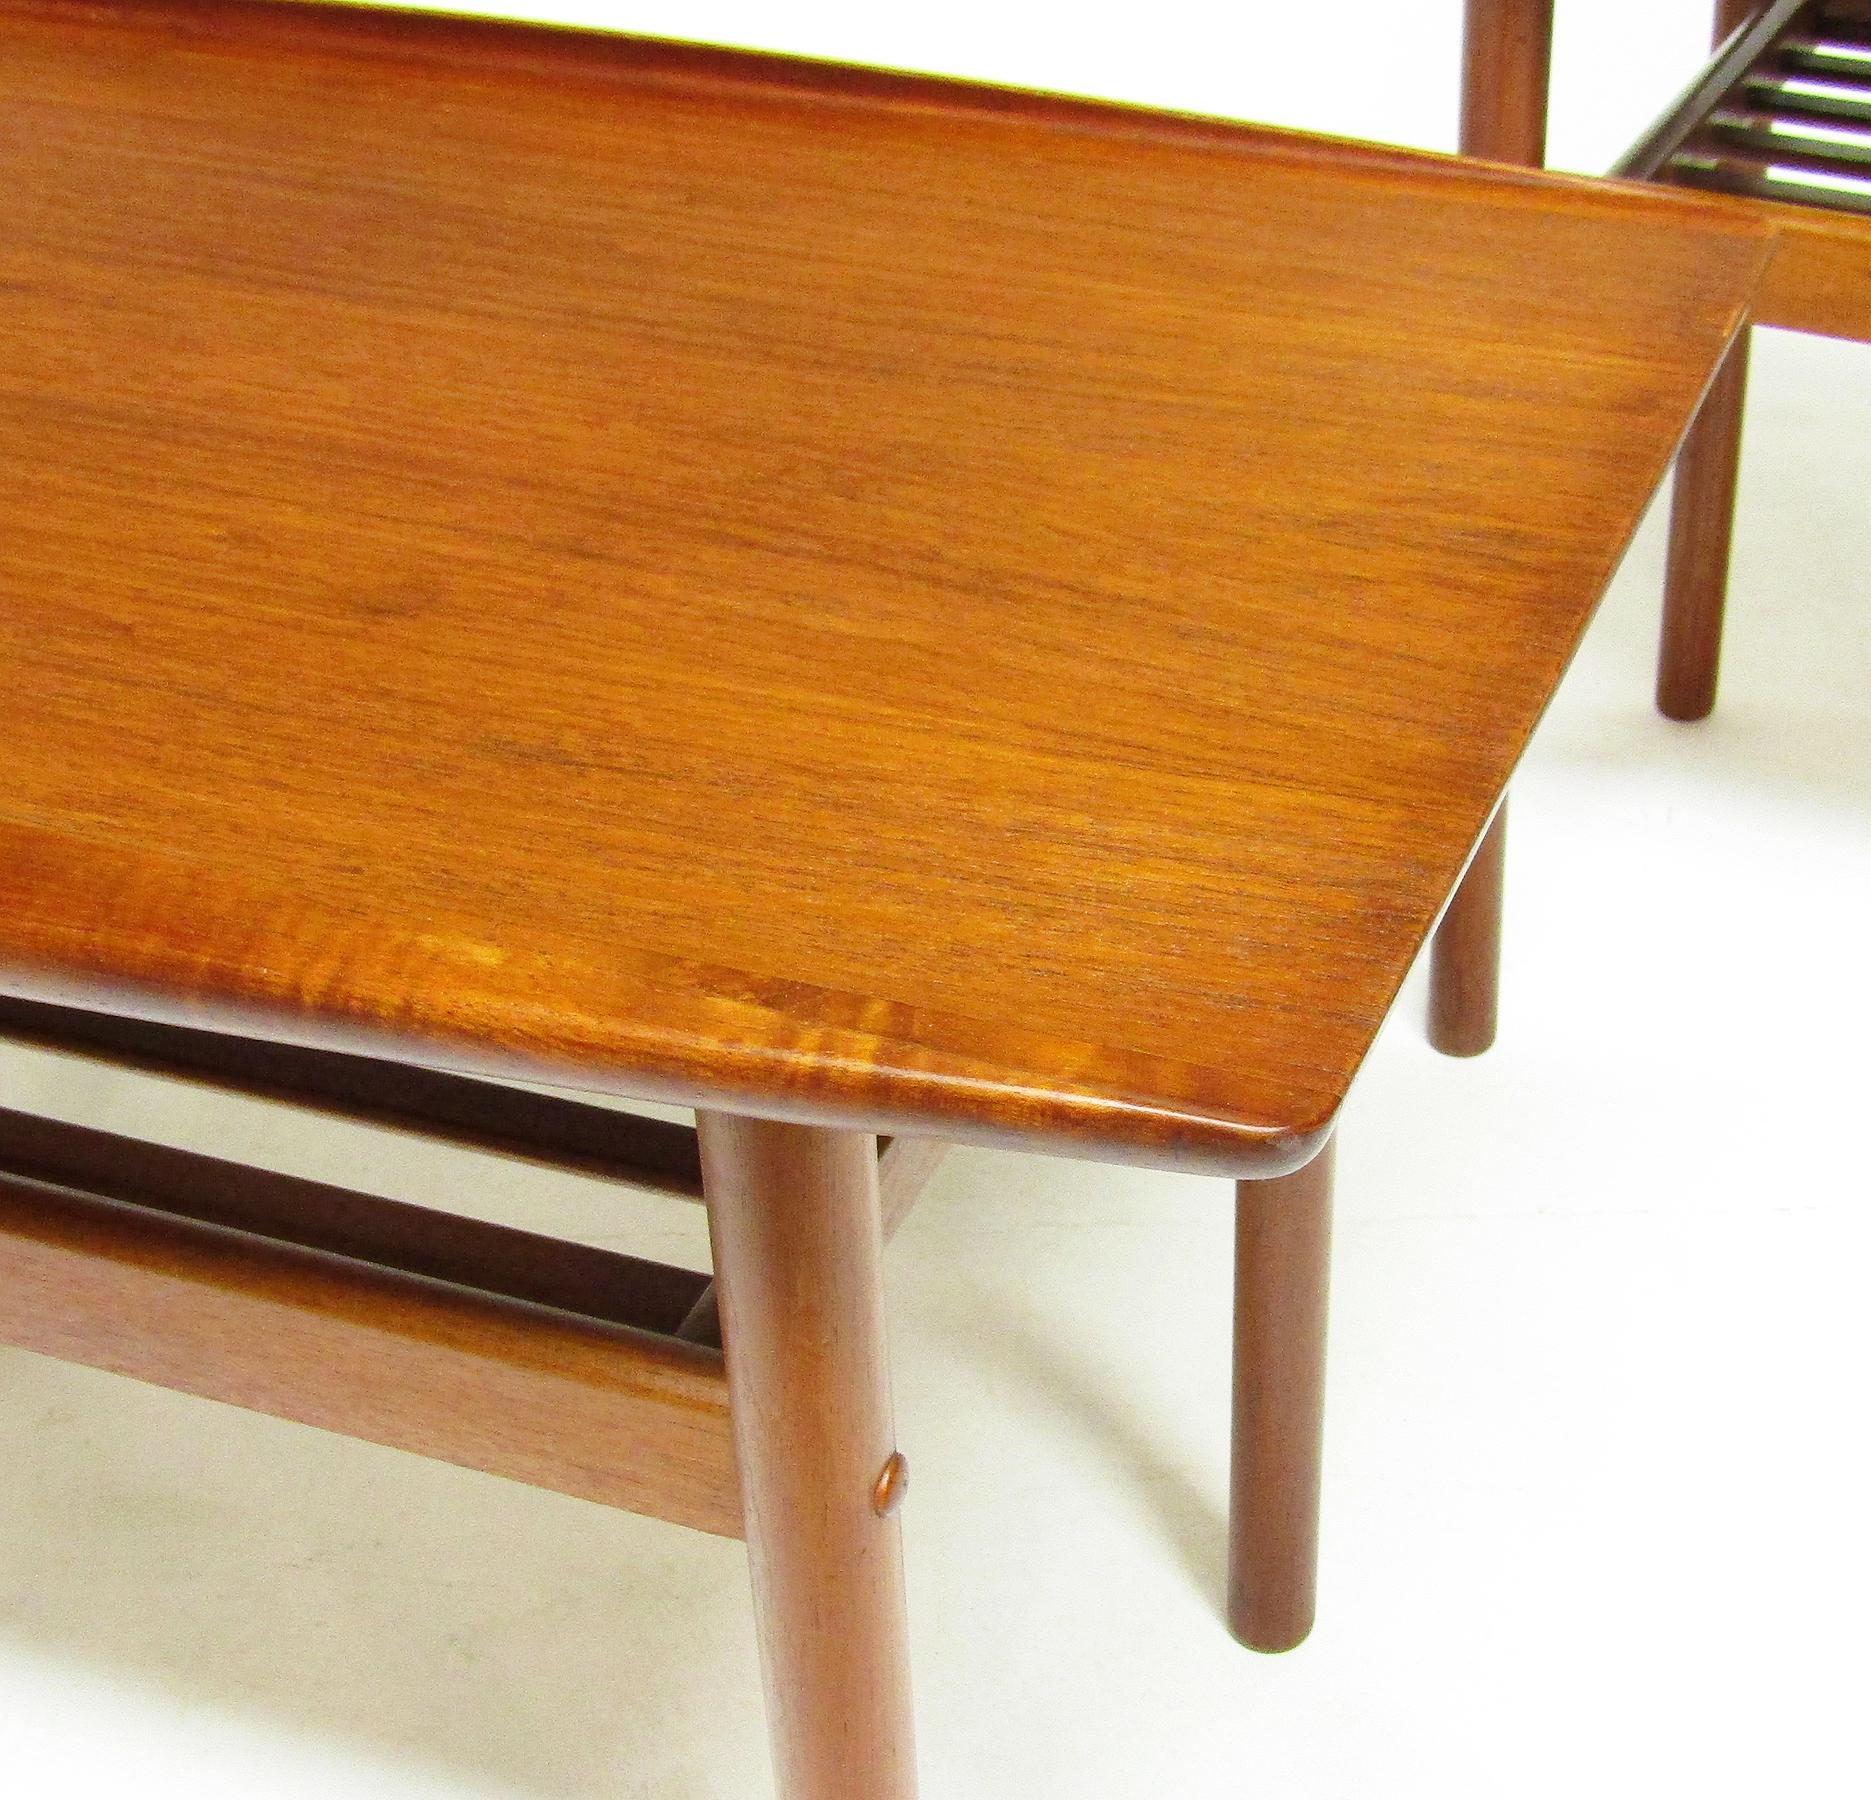 Pair Of Danish Surfboard Lamp Tables Or Night Stands In Teak By Grete Jalk For Sale 4